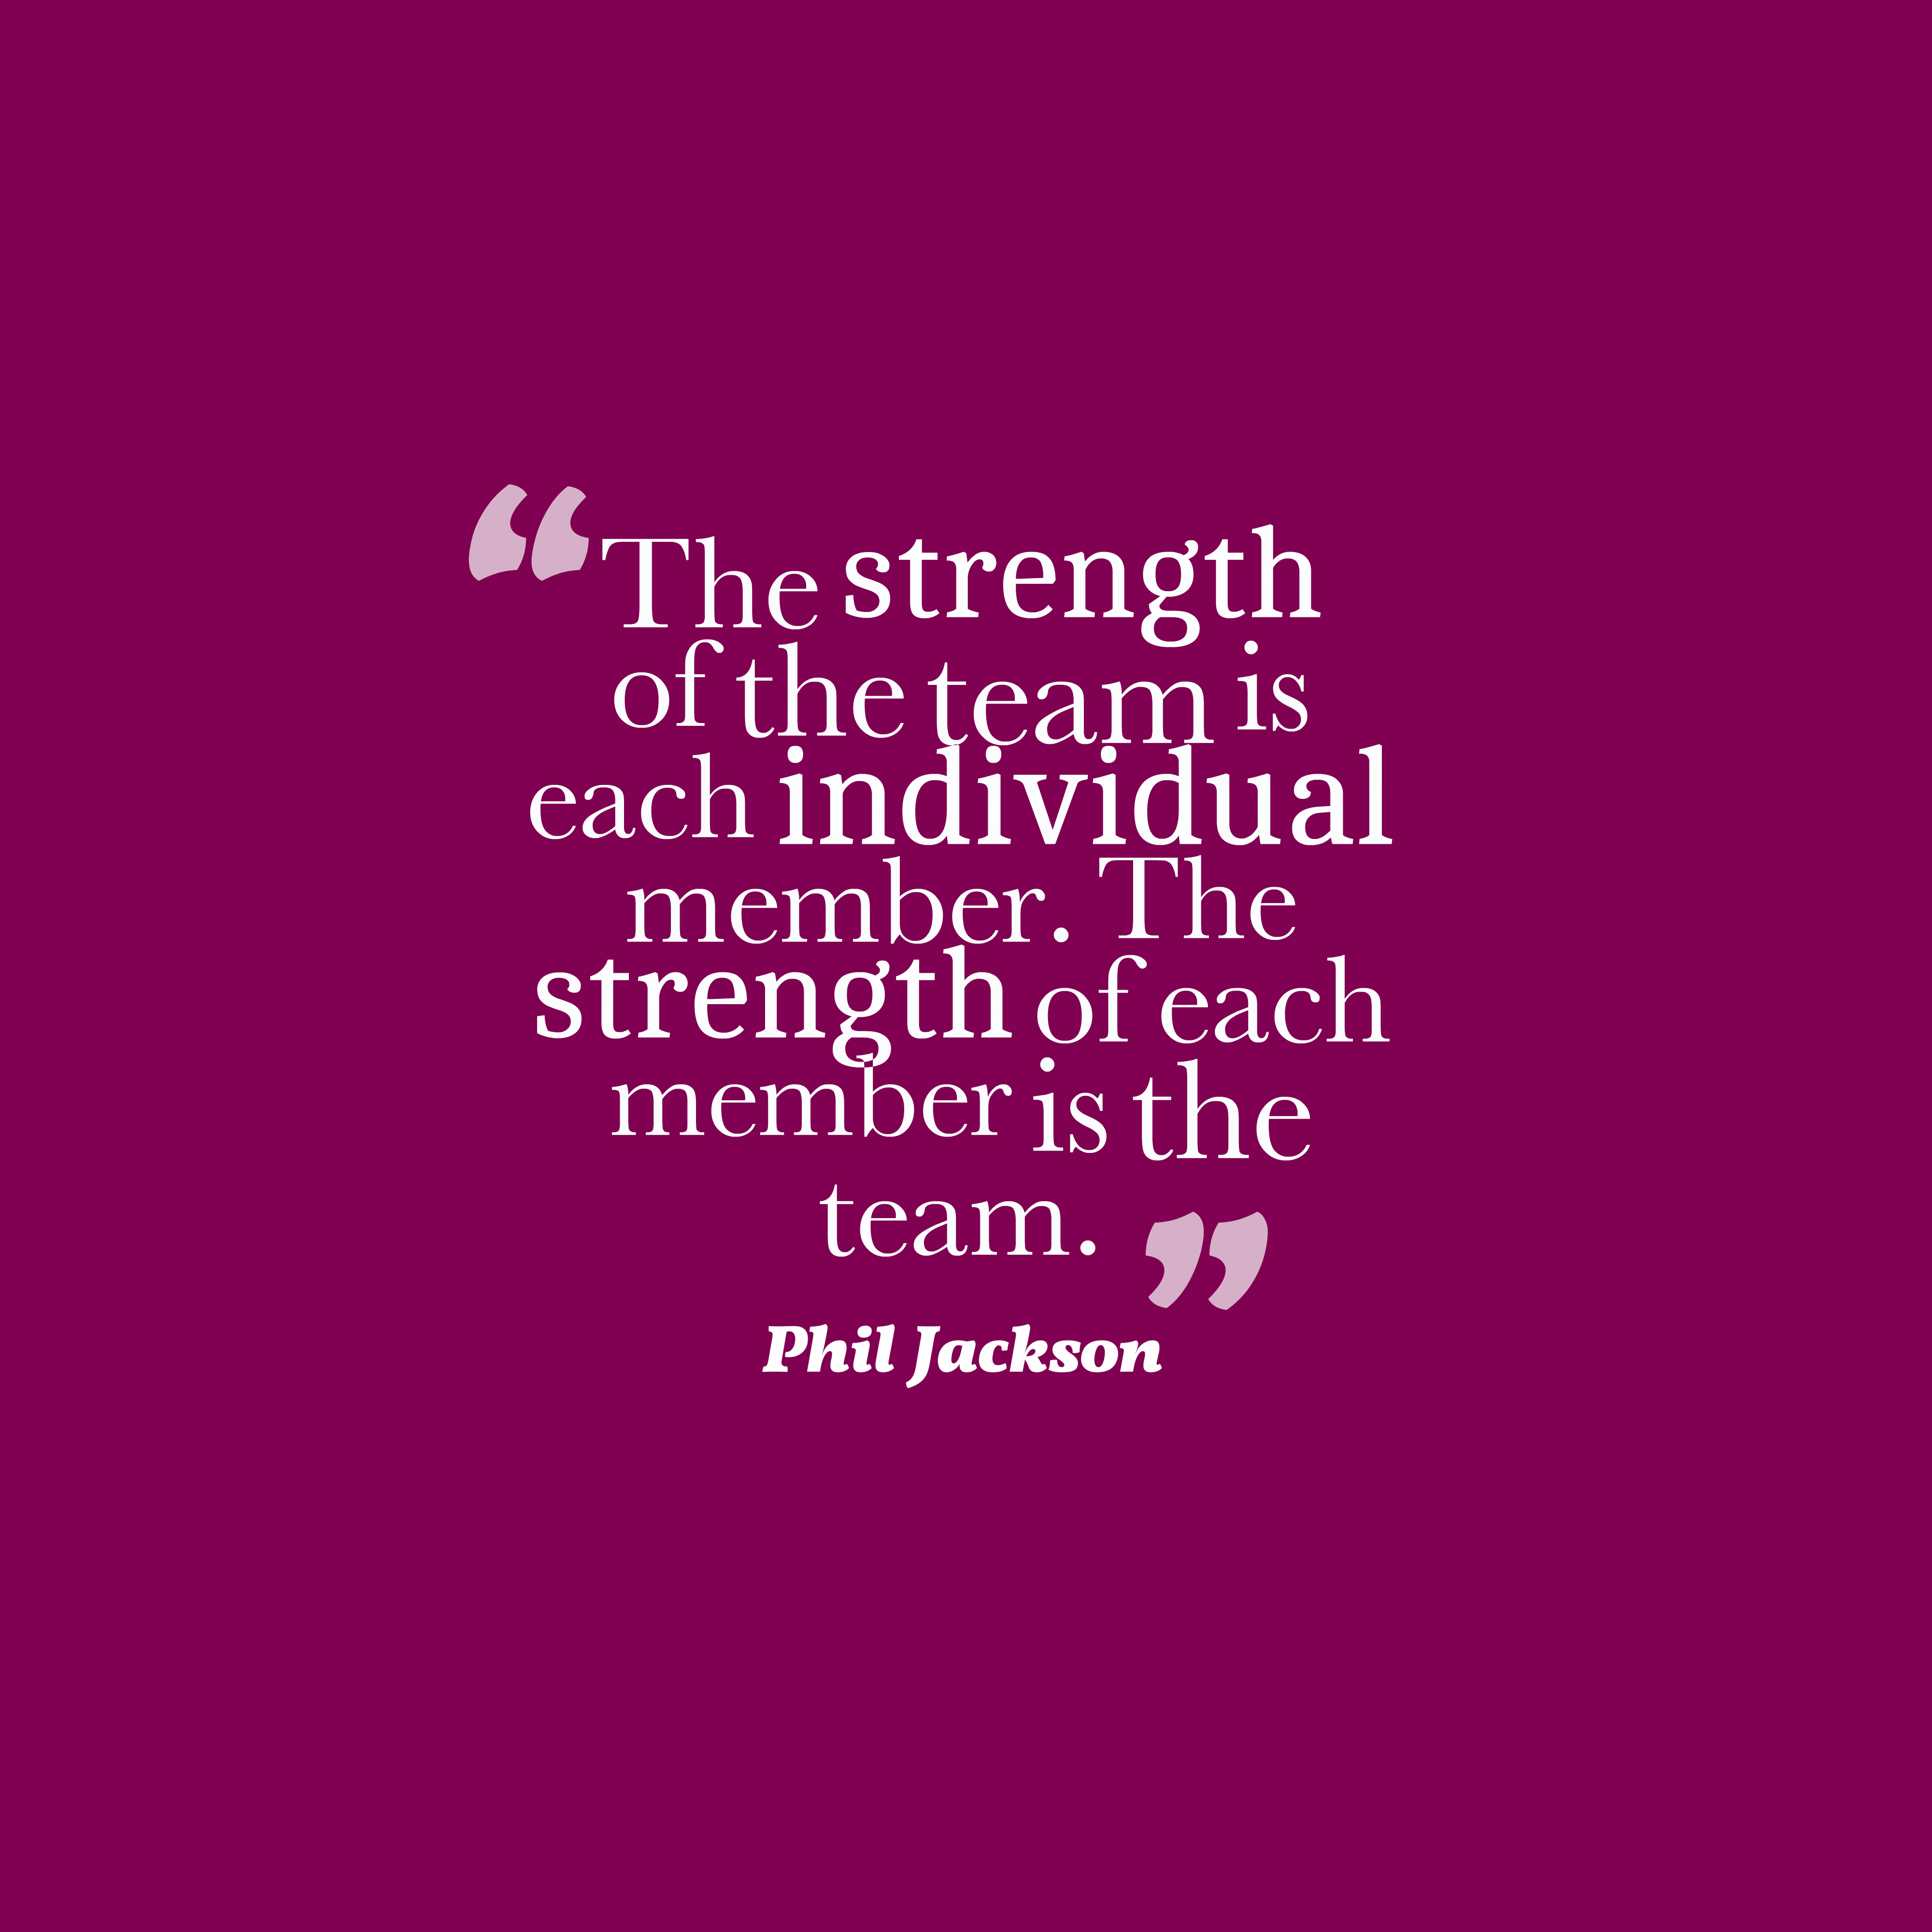 The strength of the team is each individual member. The strength of each member is the team. phil jacskon